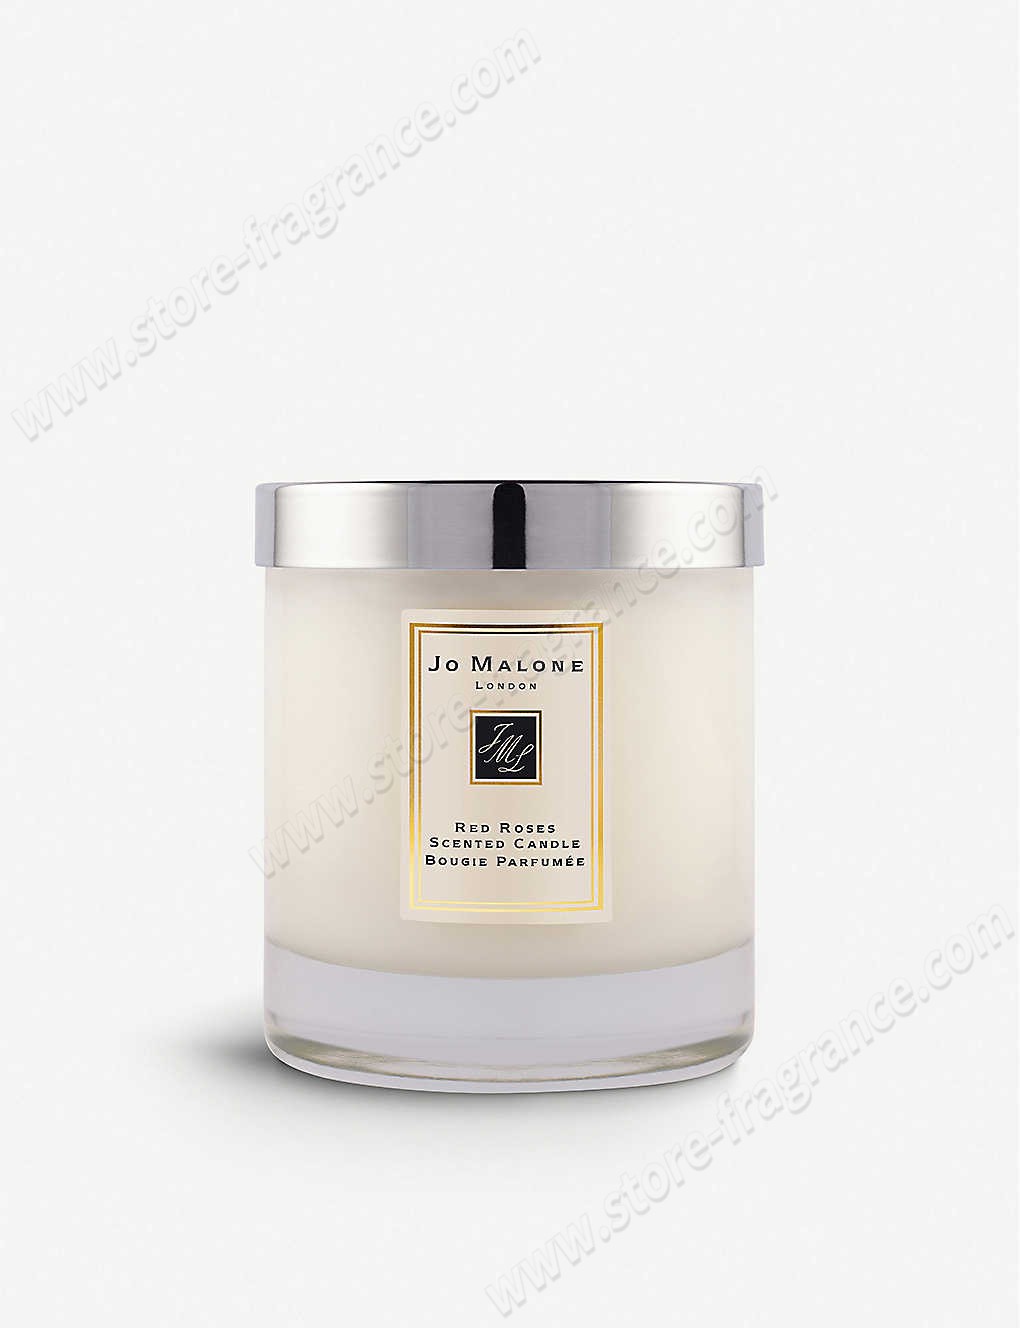 JO MALONE LONDON/Red Roses home candle 200g ✿ Discount Store - JO MALONE LONDON/Red Roses home candle 200g ✿ Discount Store